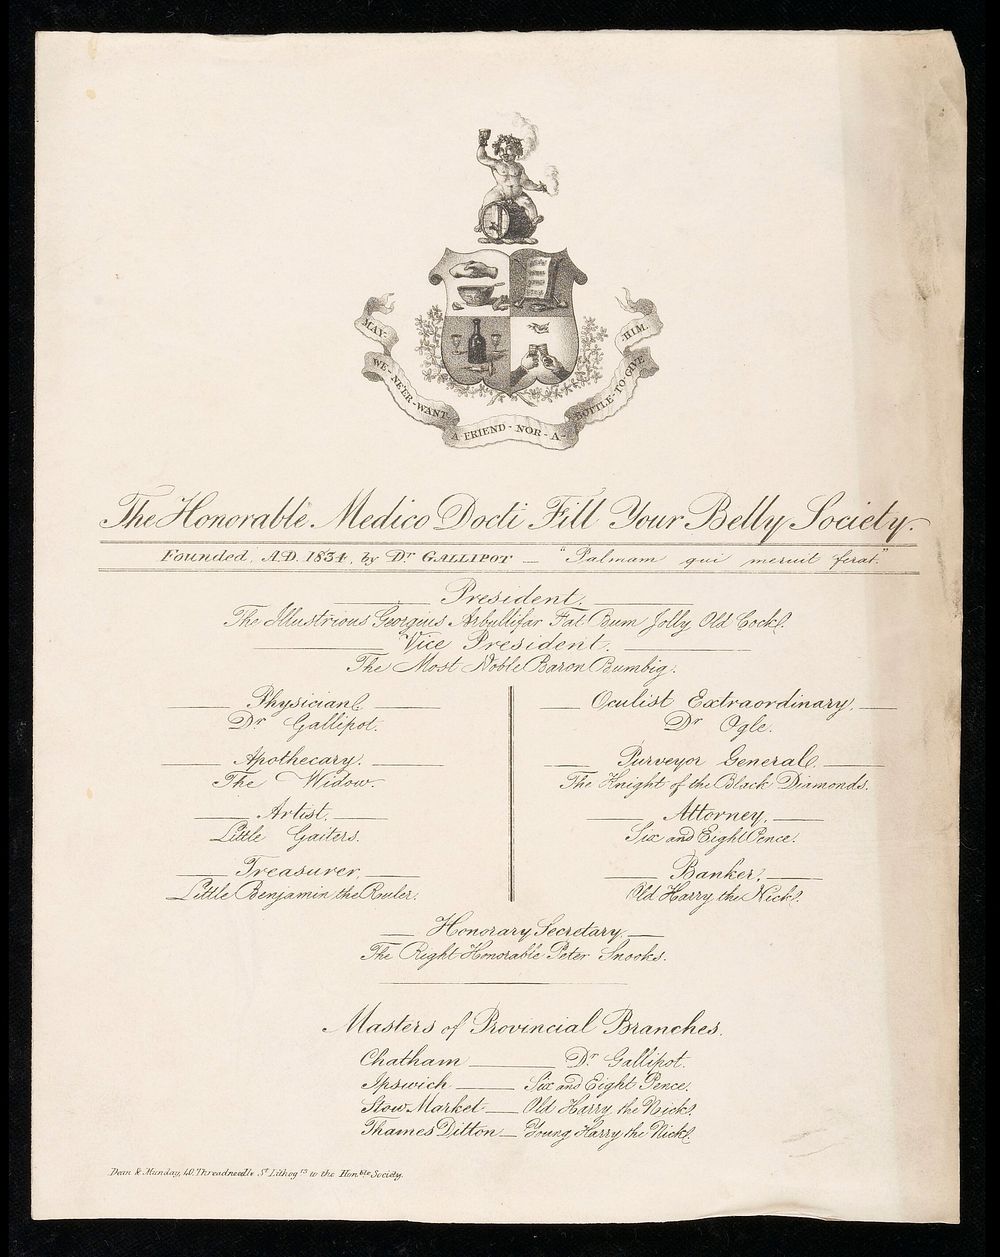 Names of officers of the Honorable Medico Docti Fill Your Belly Society, a spoof medical society. Lithograph, 1834.